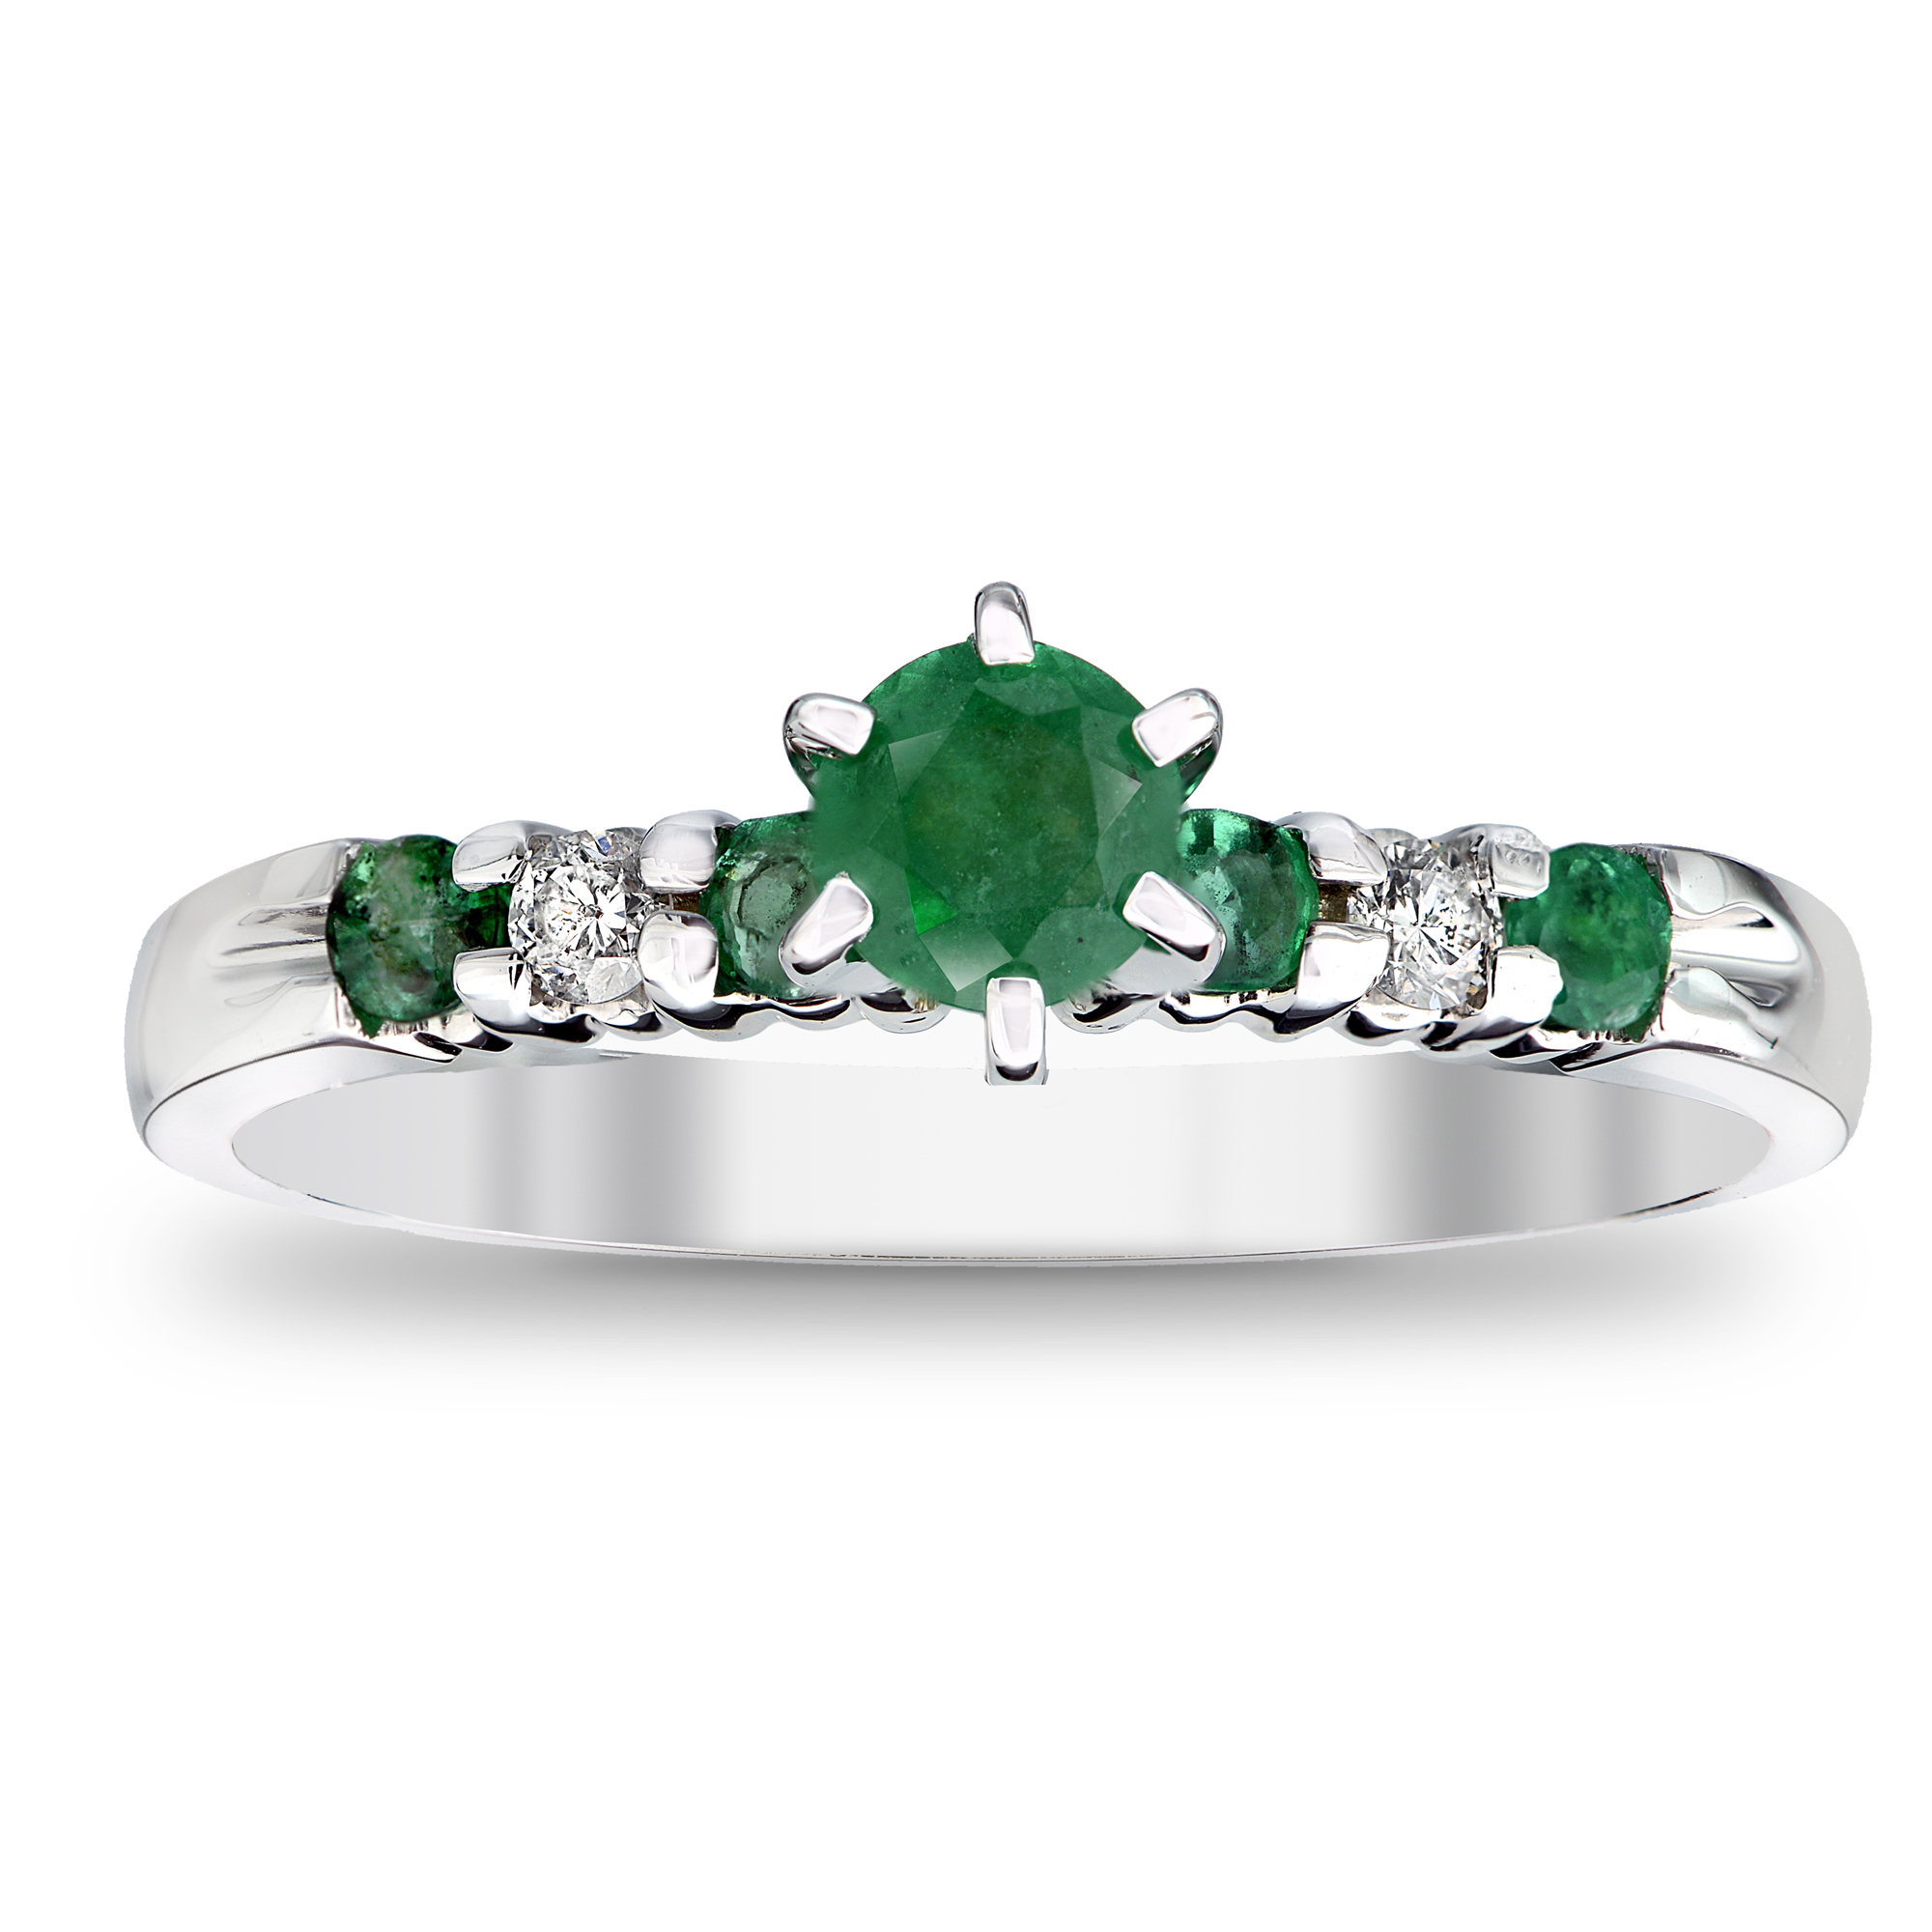 View 0.60ctw Diamond and Emerald Engagement Ring in 14k White Gold